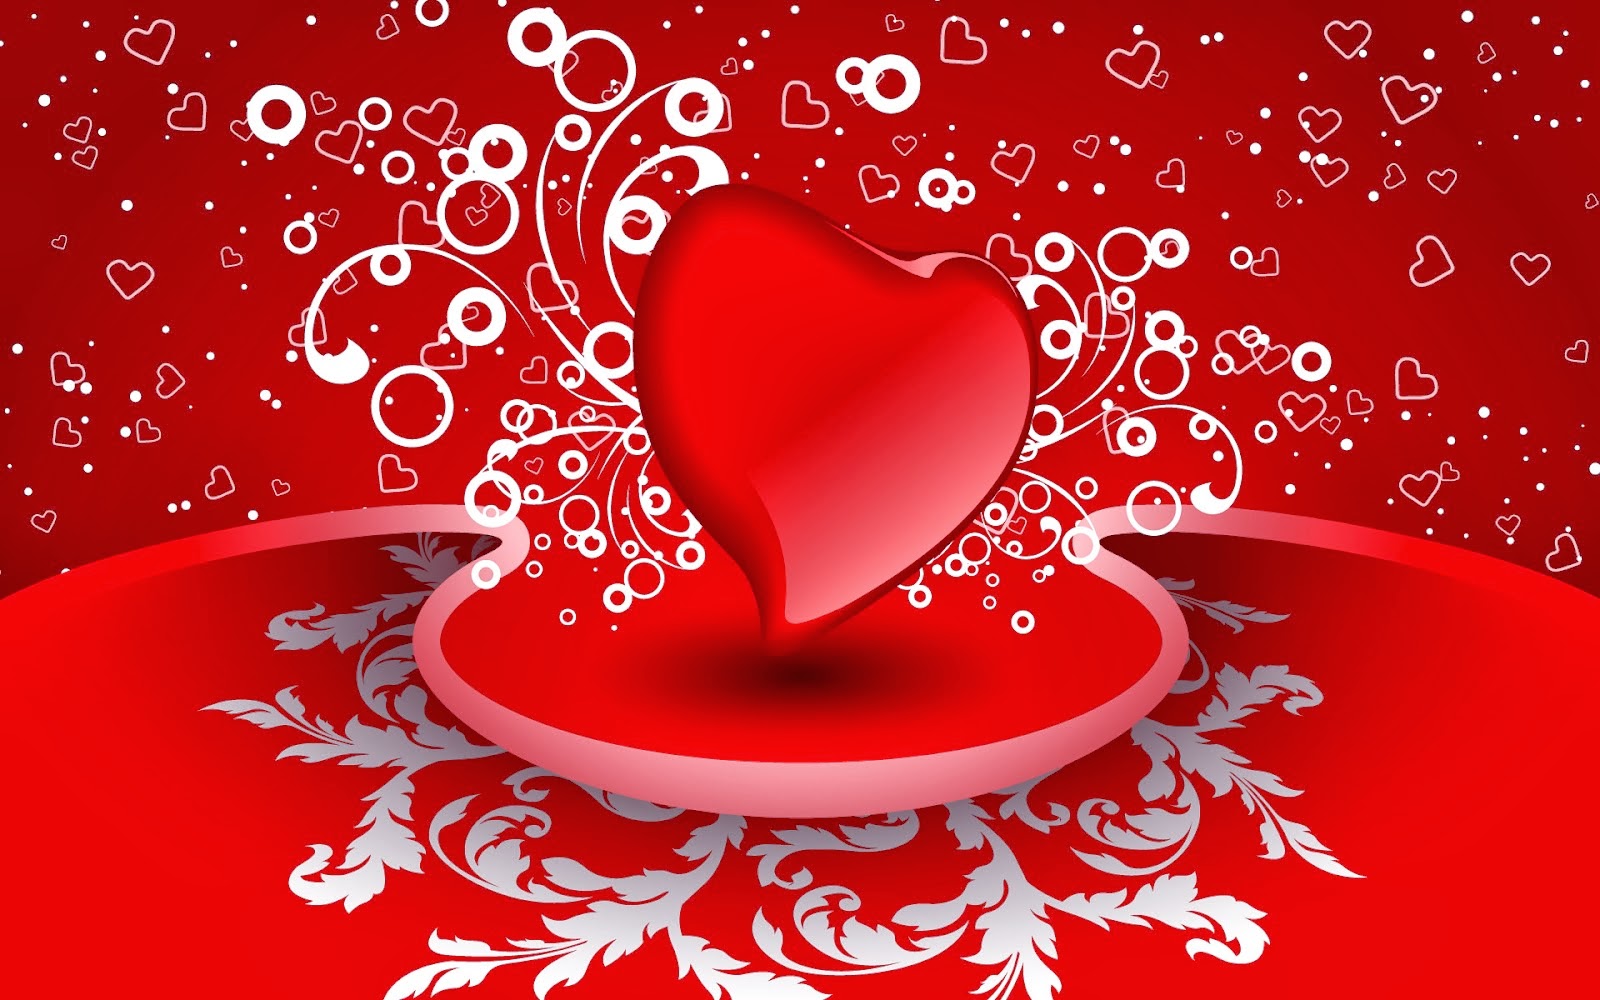 Beautiful Wallpapers and Images Valentine day wallpaper free